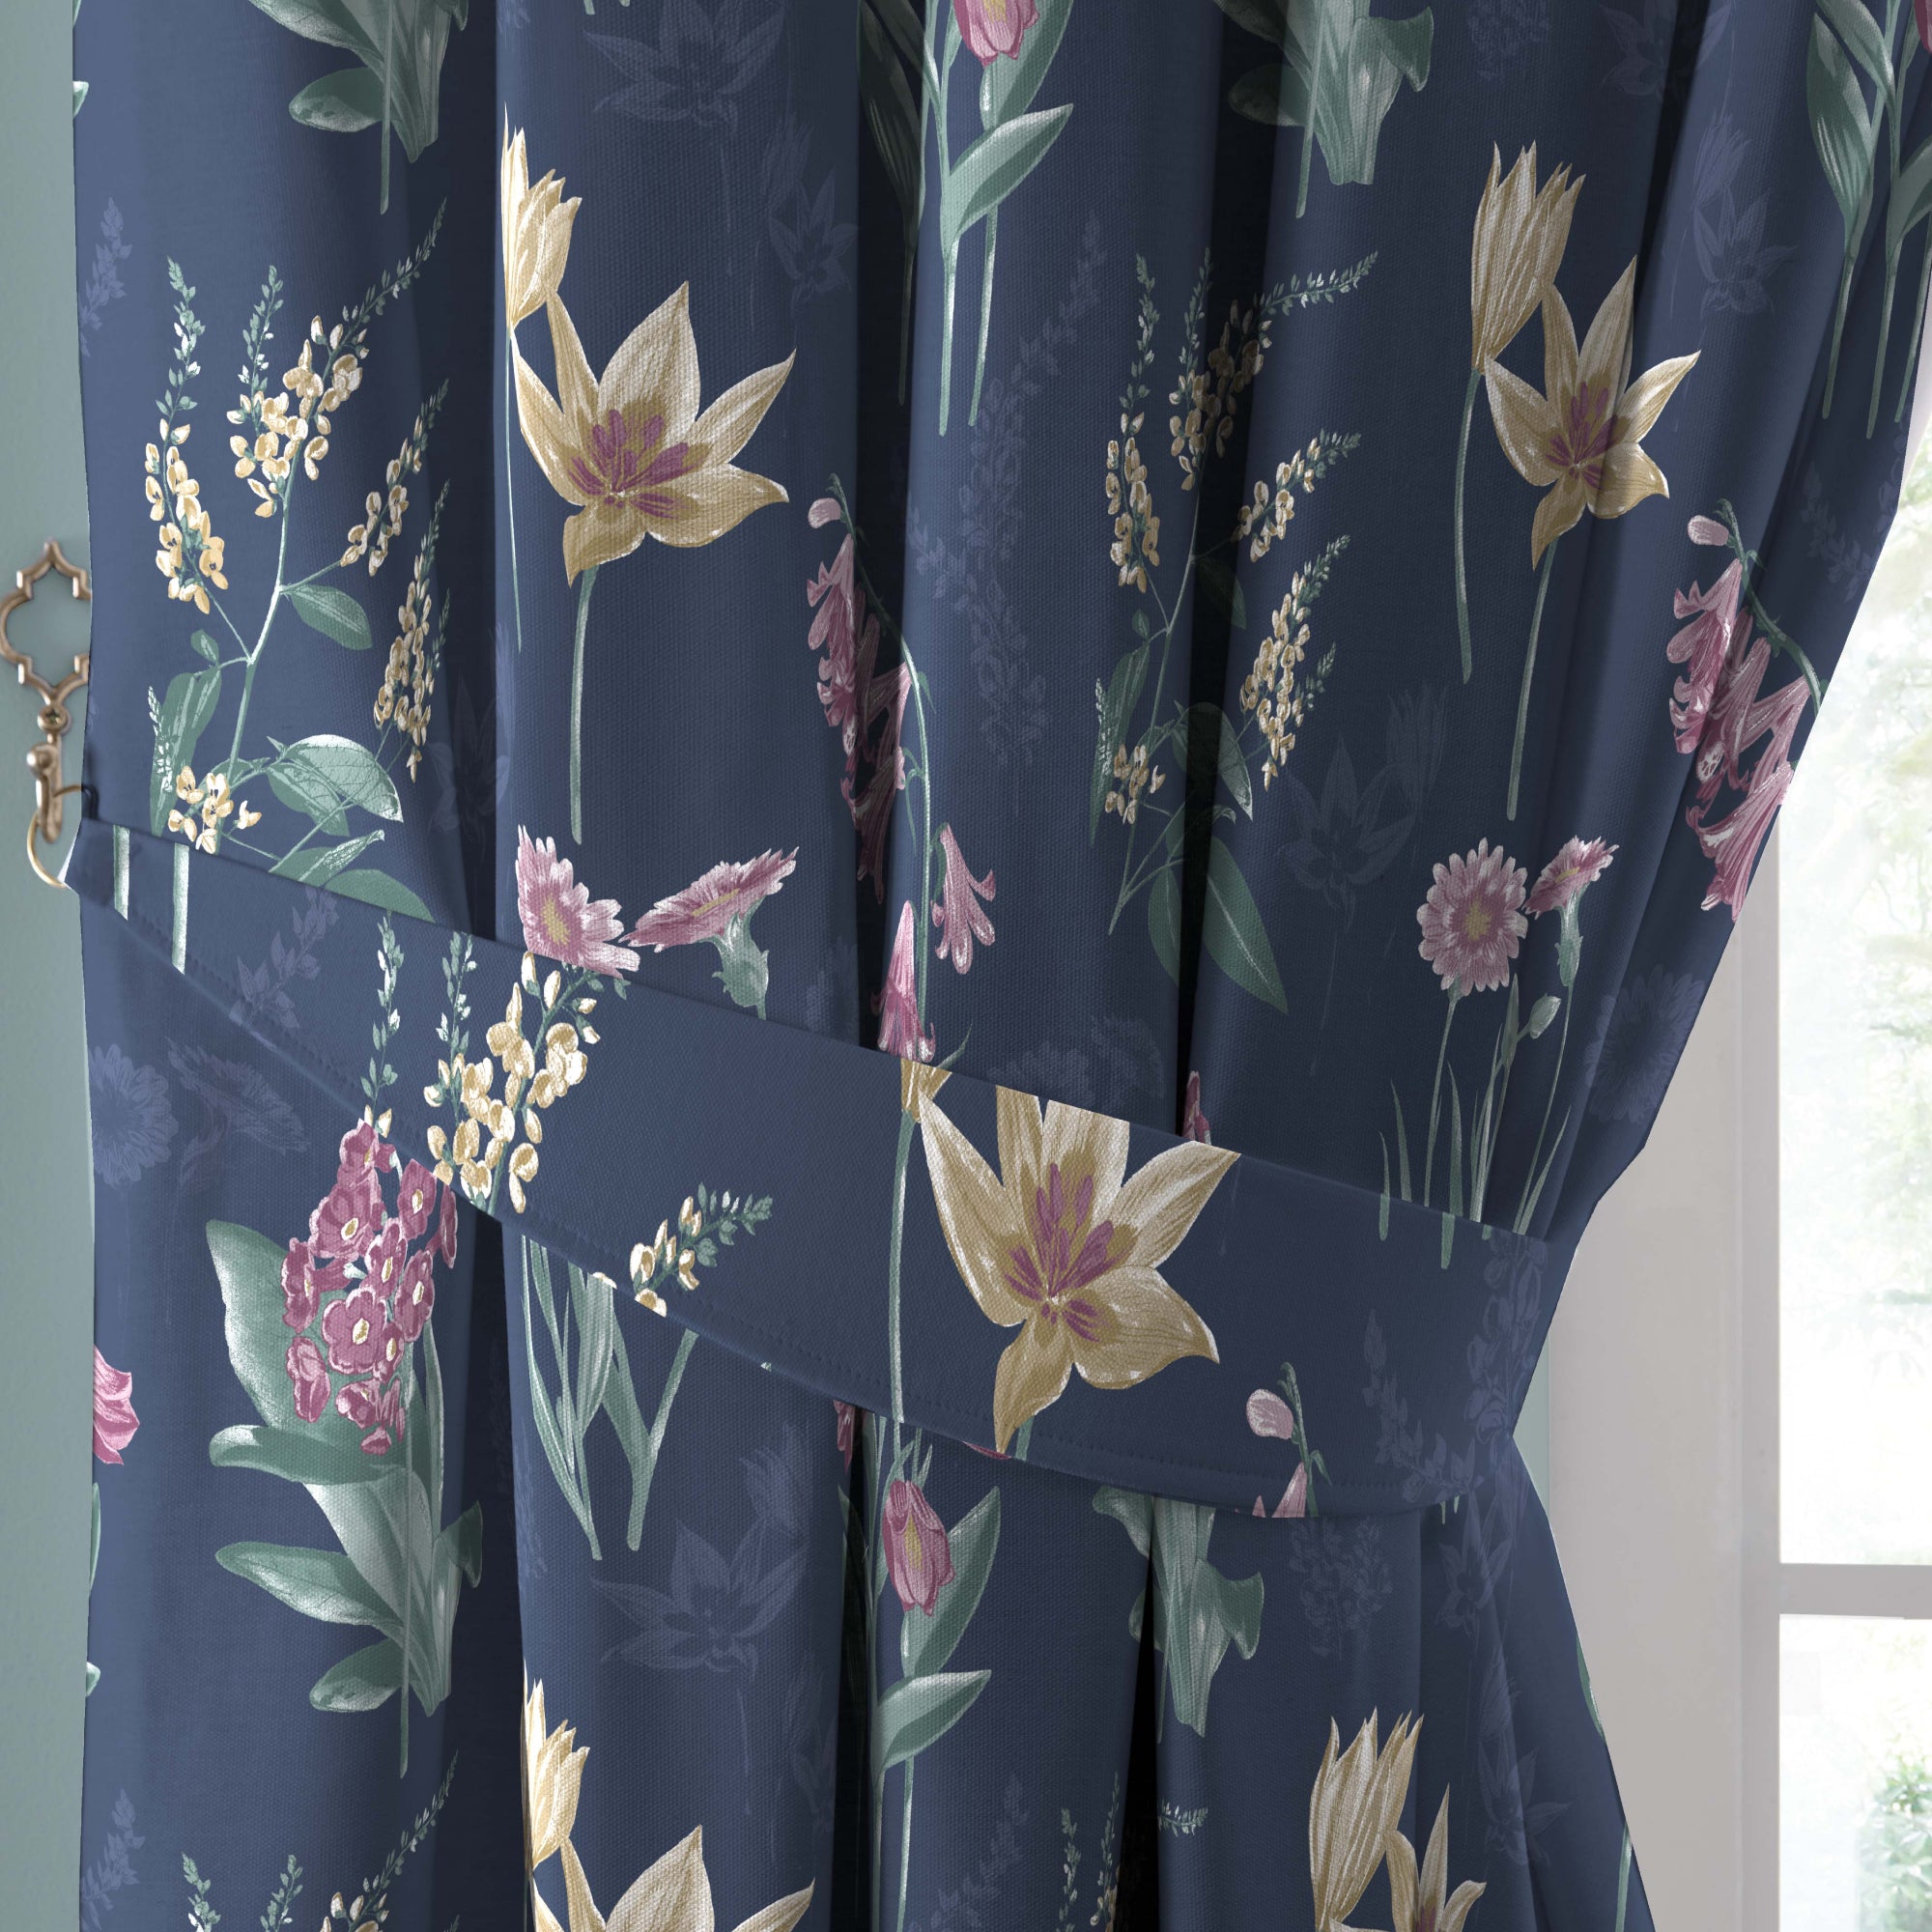 Pair of Pencil Pleat Curtains With Tie-Backs Caberne by Dreams & Drapes Curtains in Navy